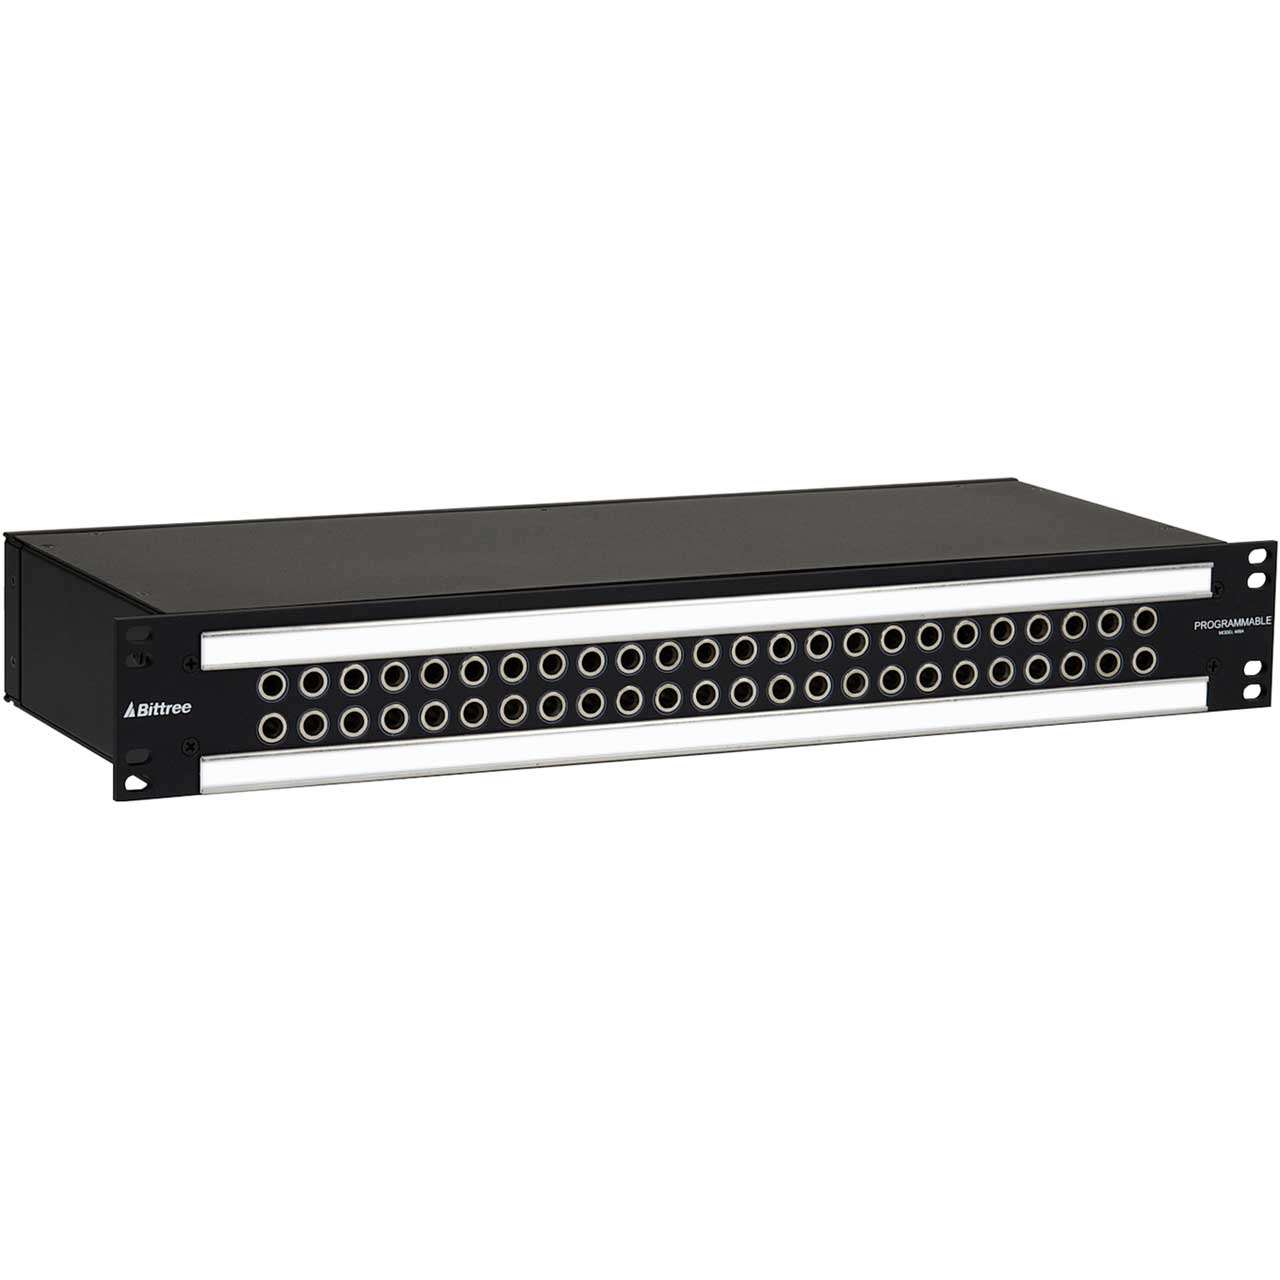 Bittree B48DC-NNPIH/E3 M2OU7L 1.5 RU 2x48 Long Frame Patchbay with Non-Normal Isolated Grounds E3 Rear Interface